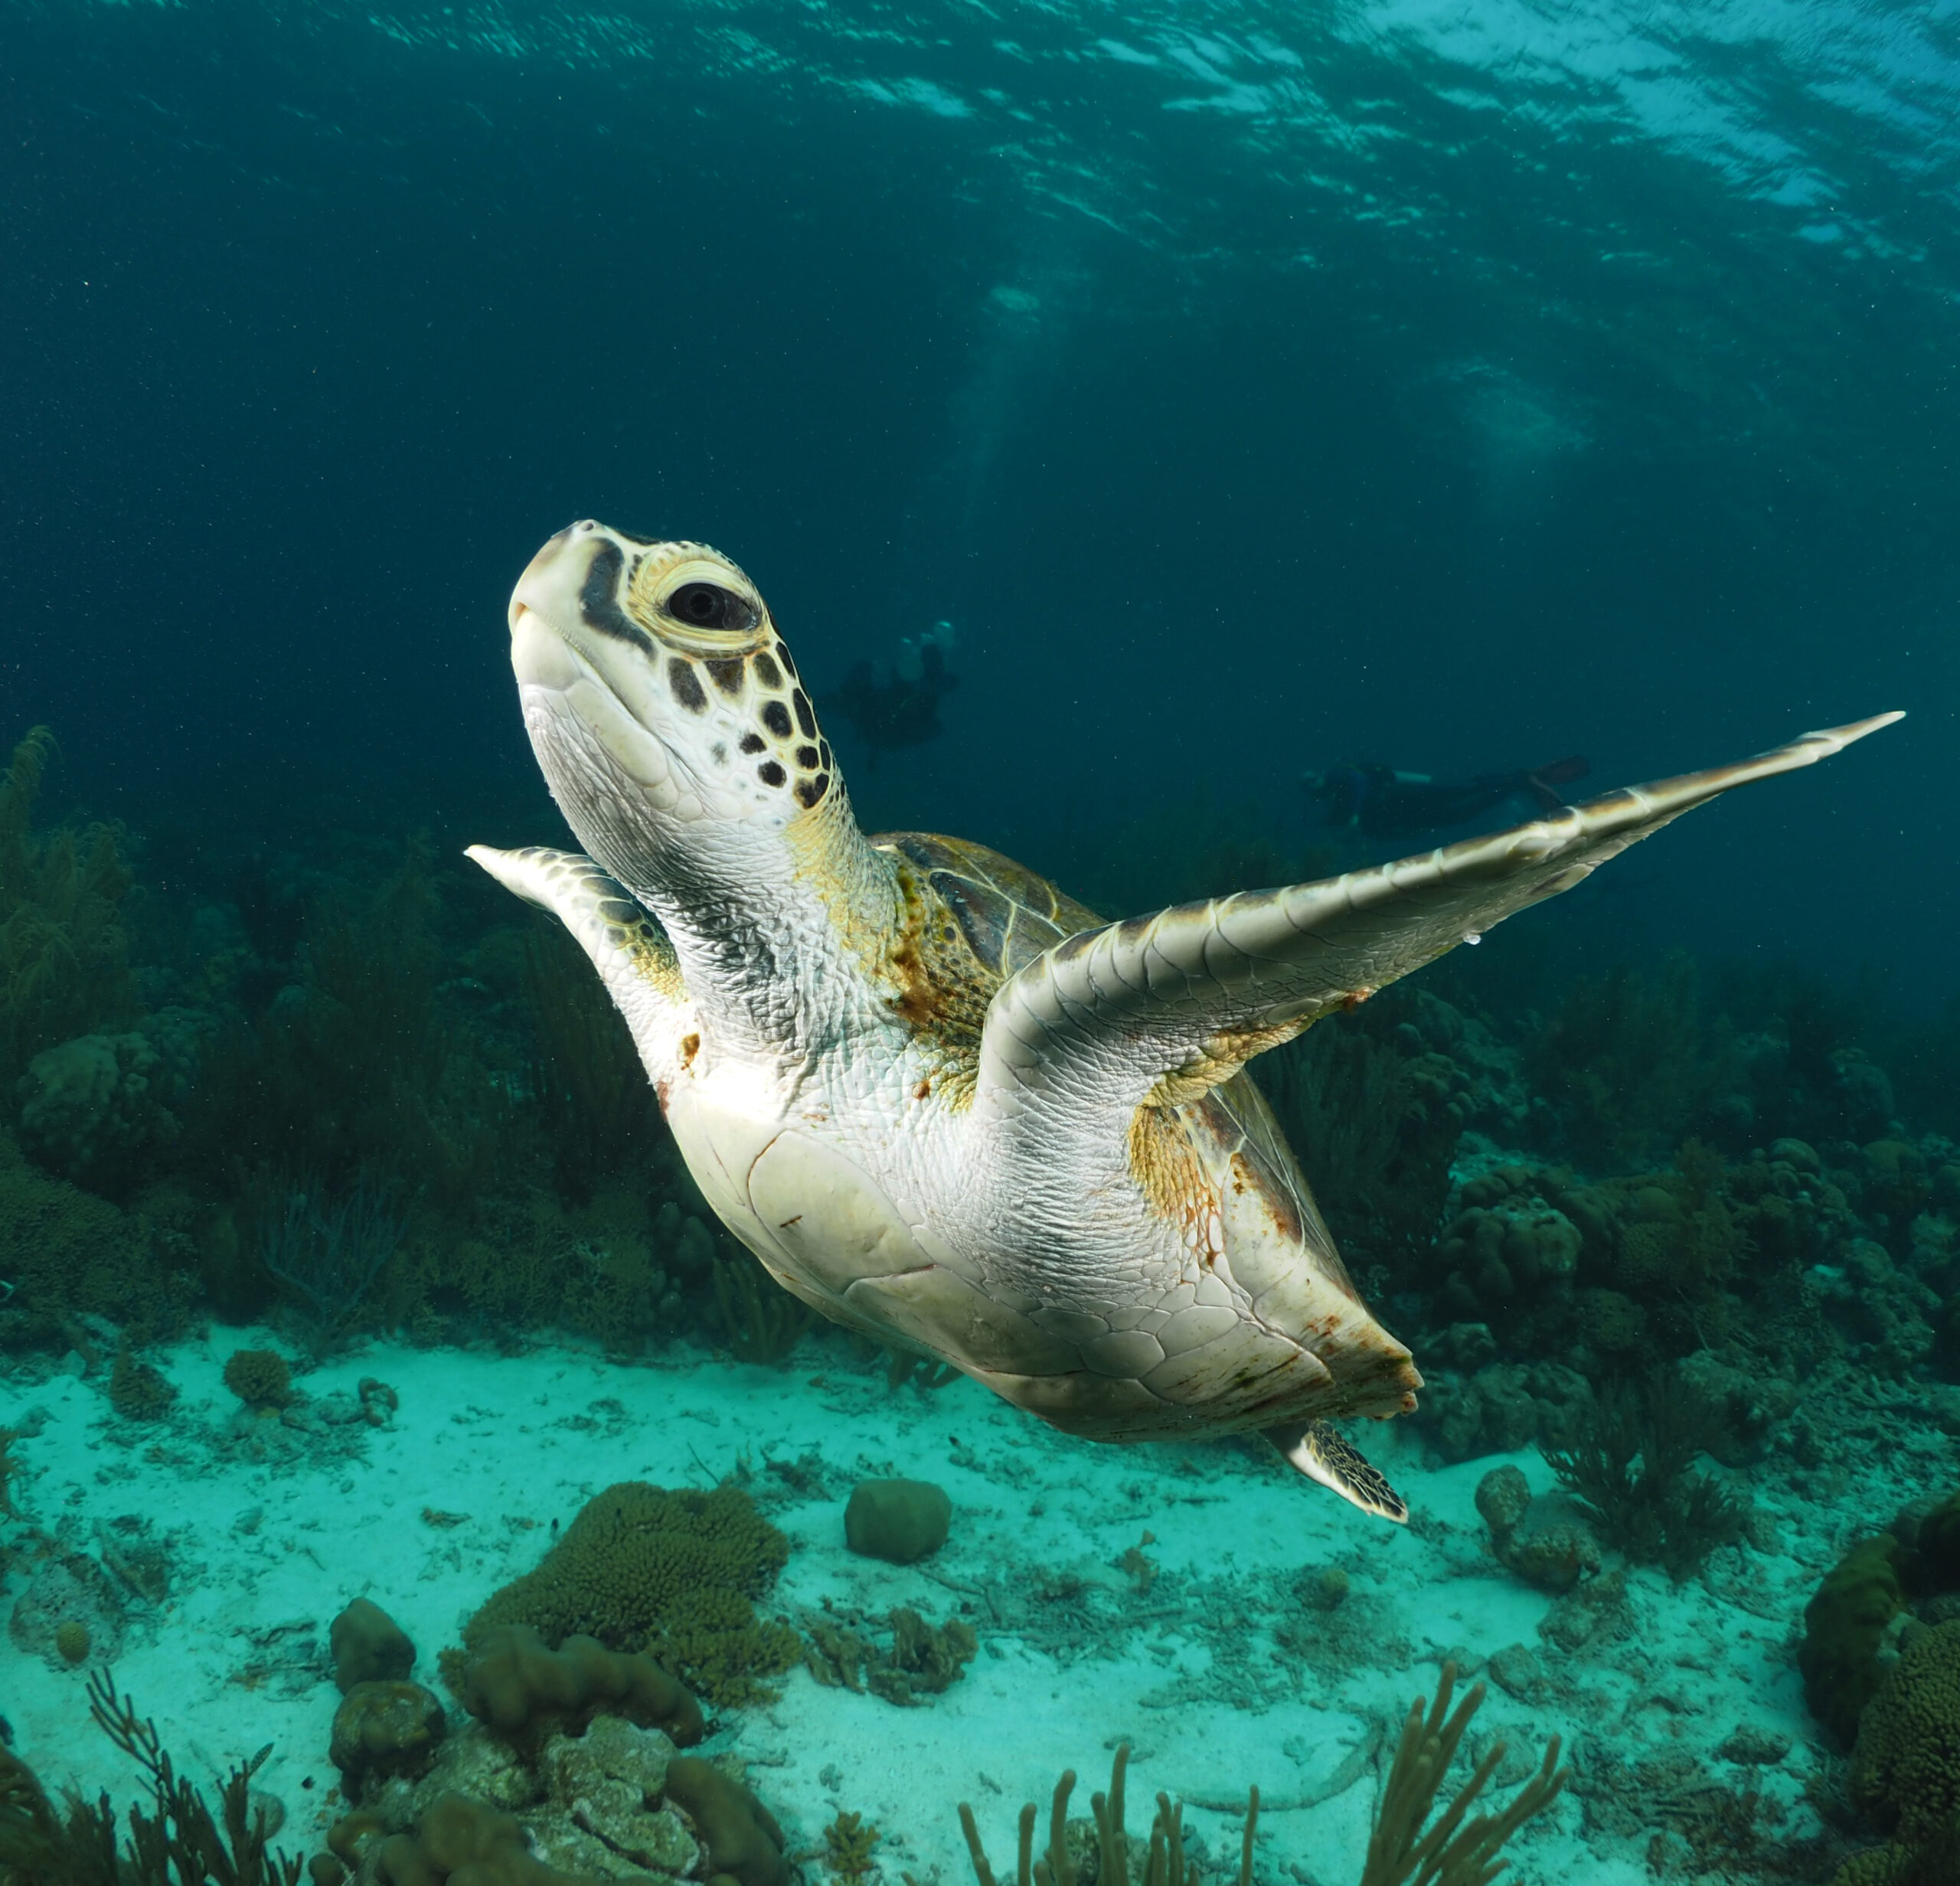 Hello beauty! In the waters of Bonaire you will see turtles when diving or going for a snorkelling trip. More information you can find at the Sea turtle foundation Bonaire